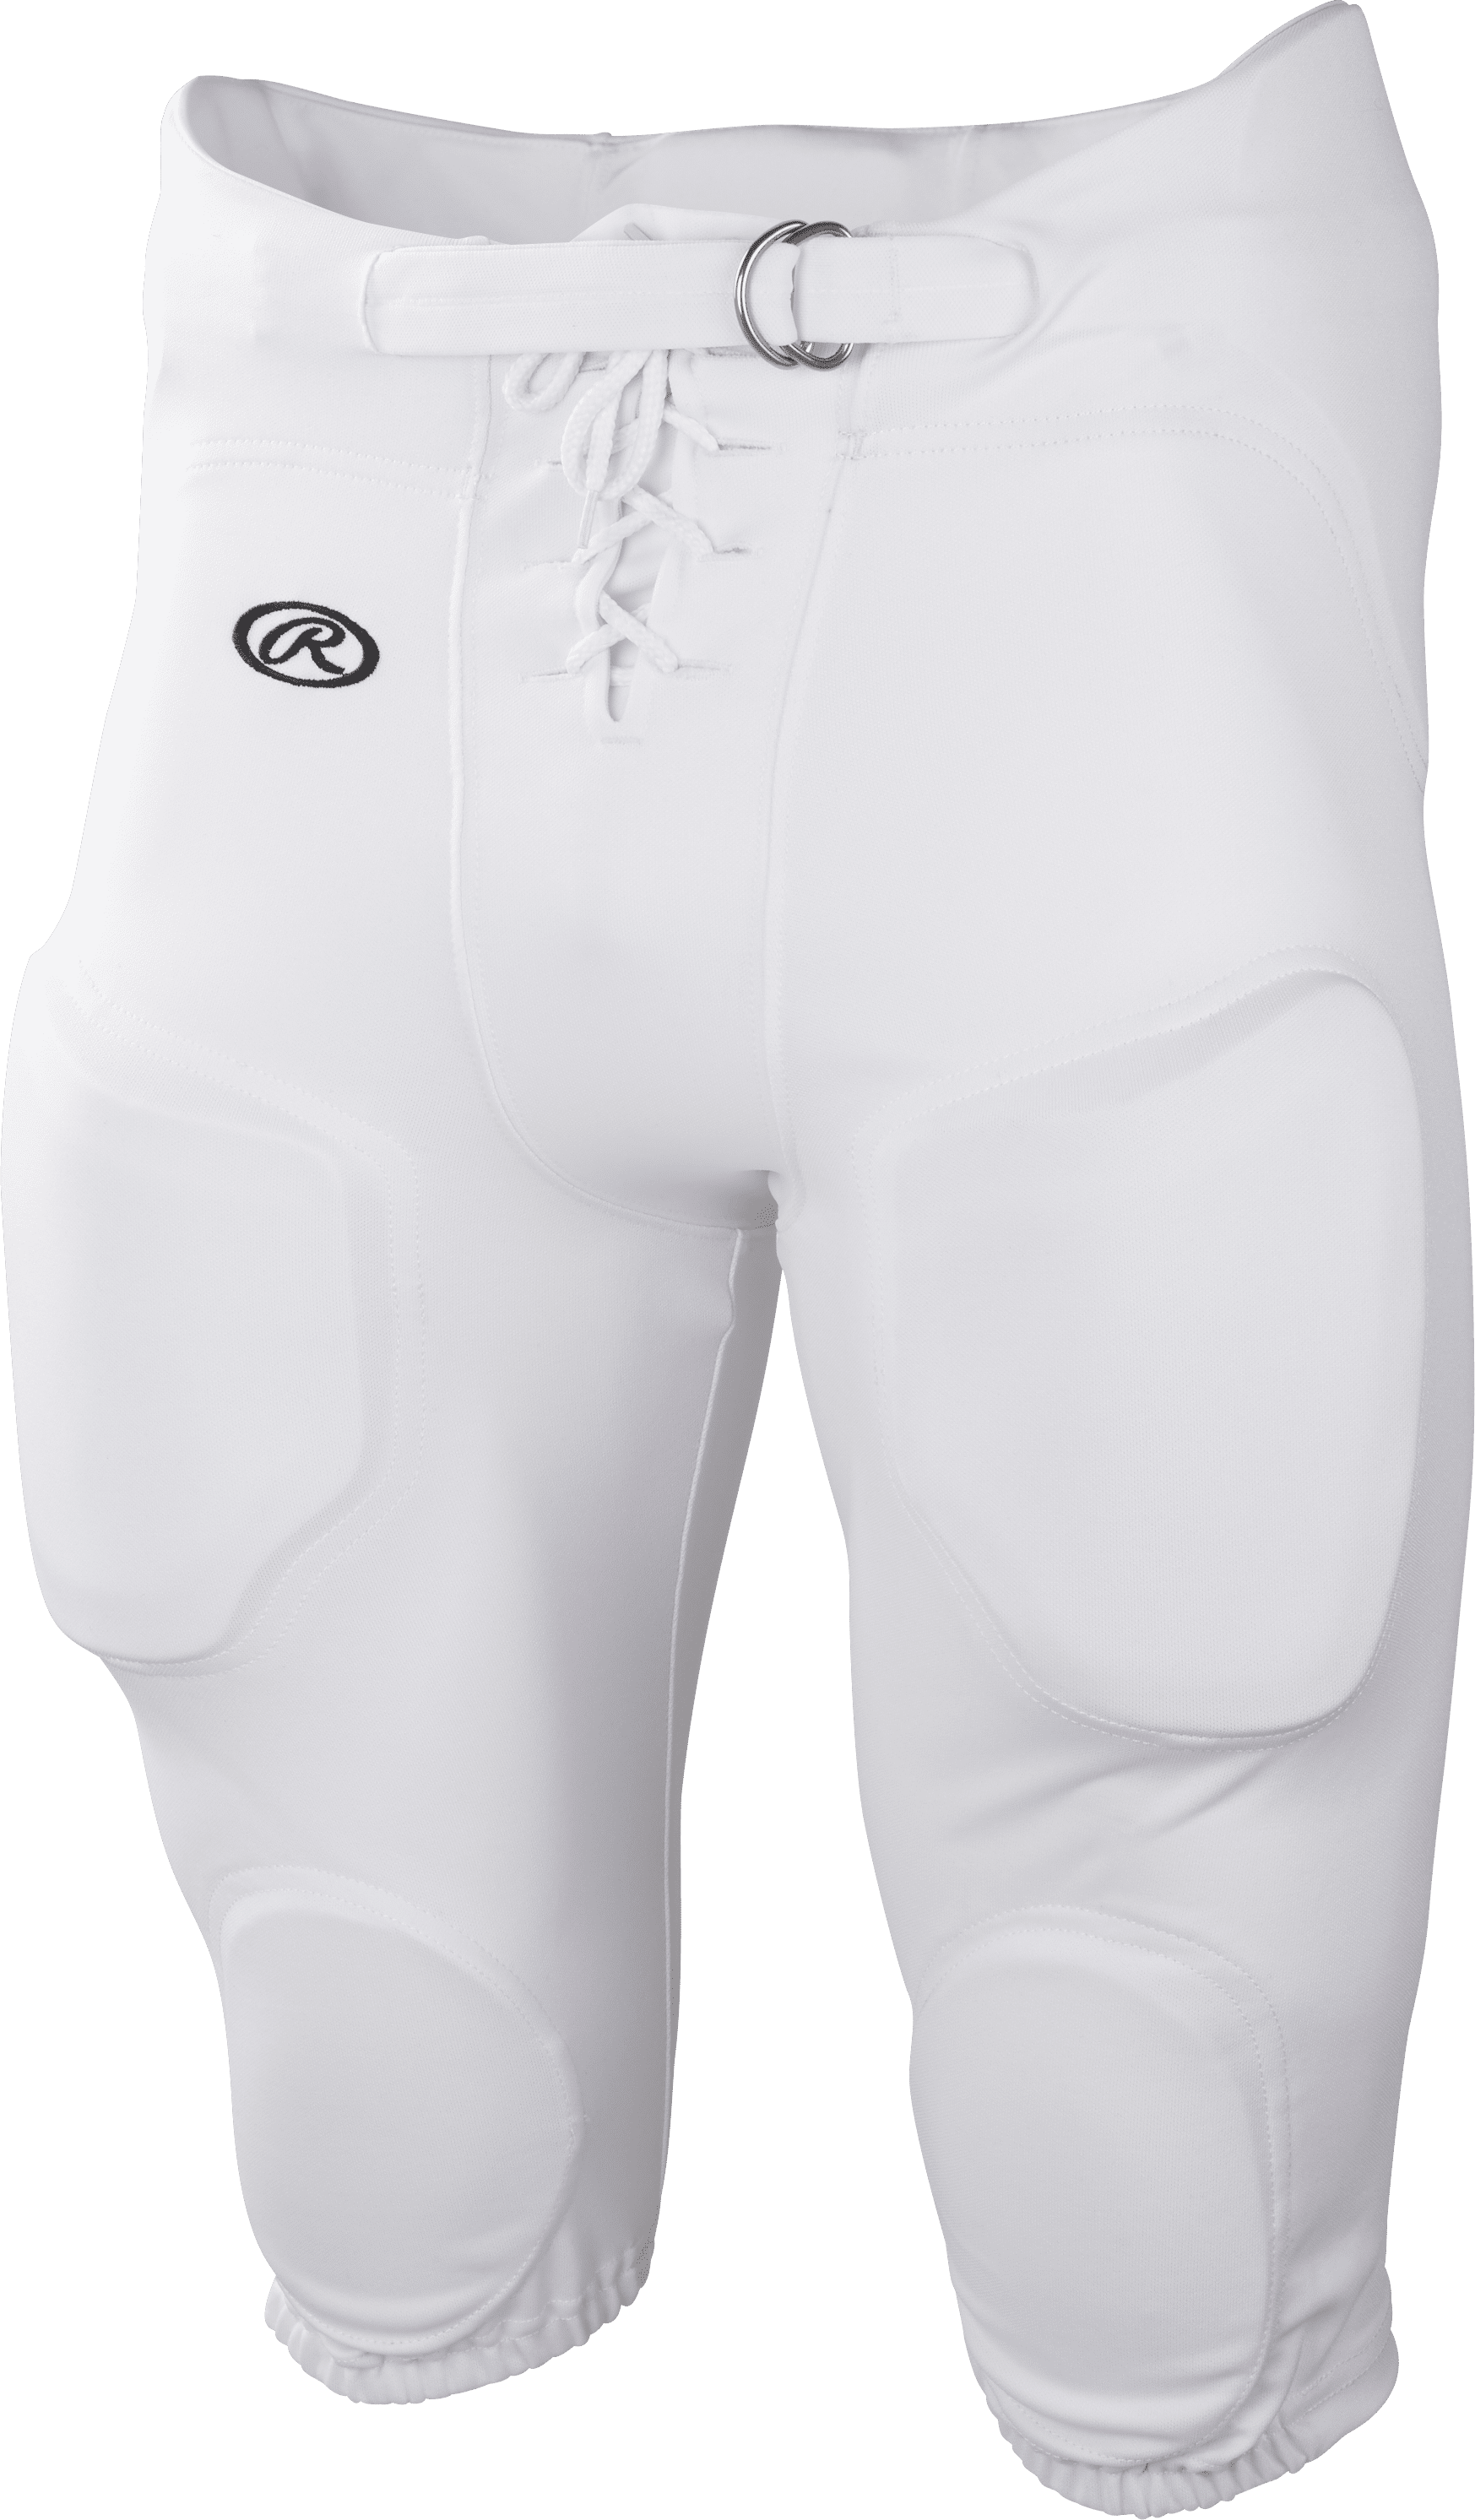 Rawlings Youth Game/Practice Football Pants 